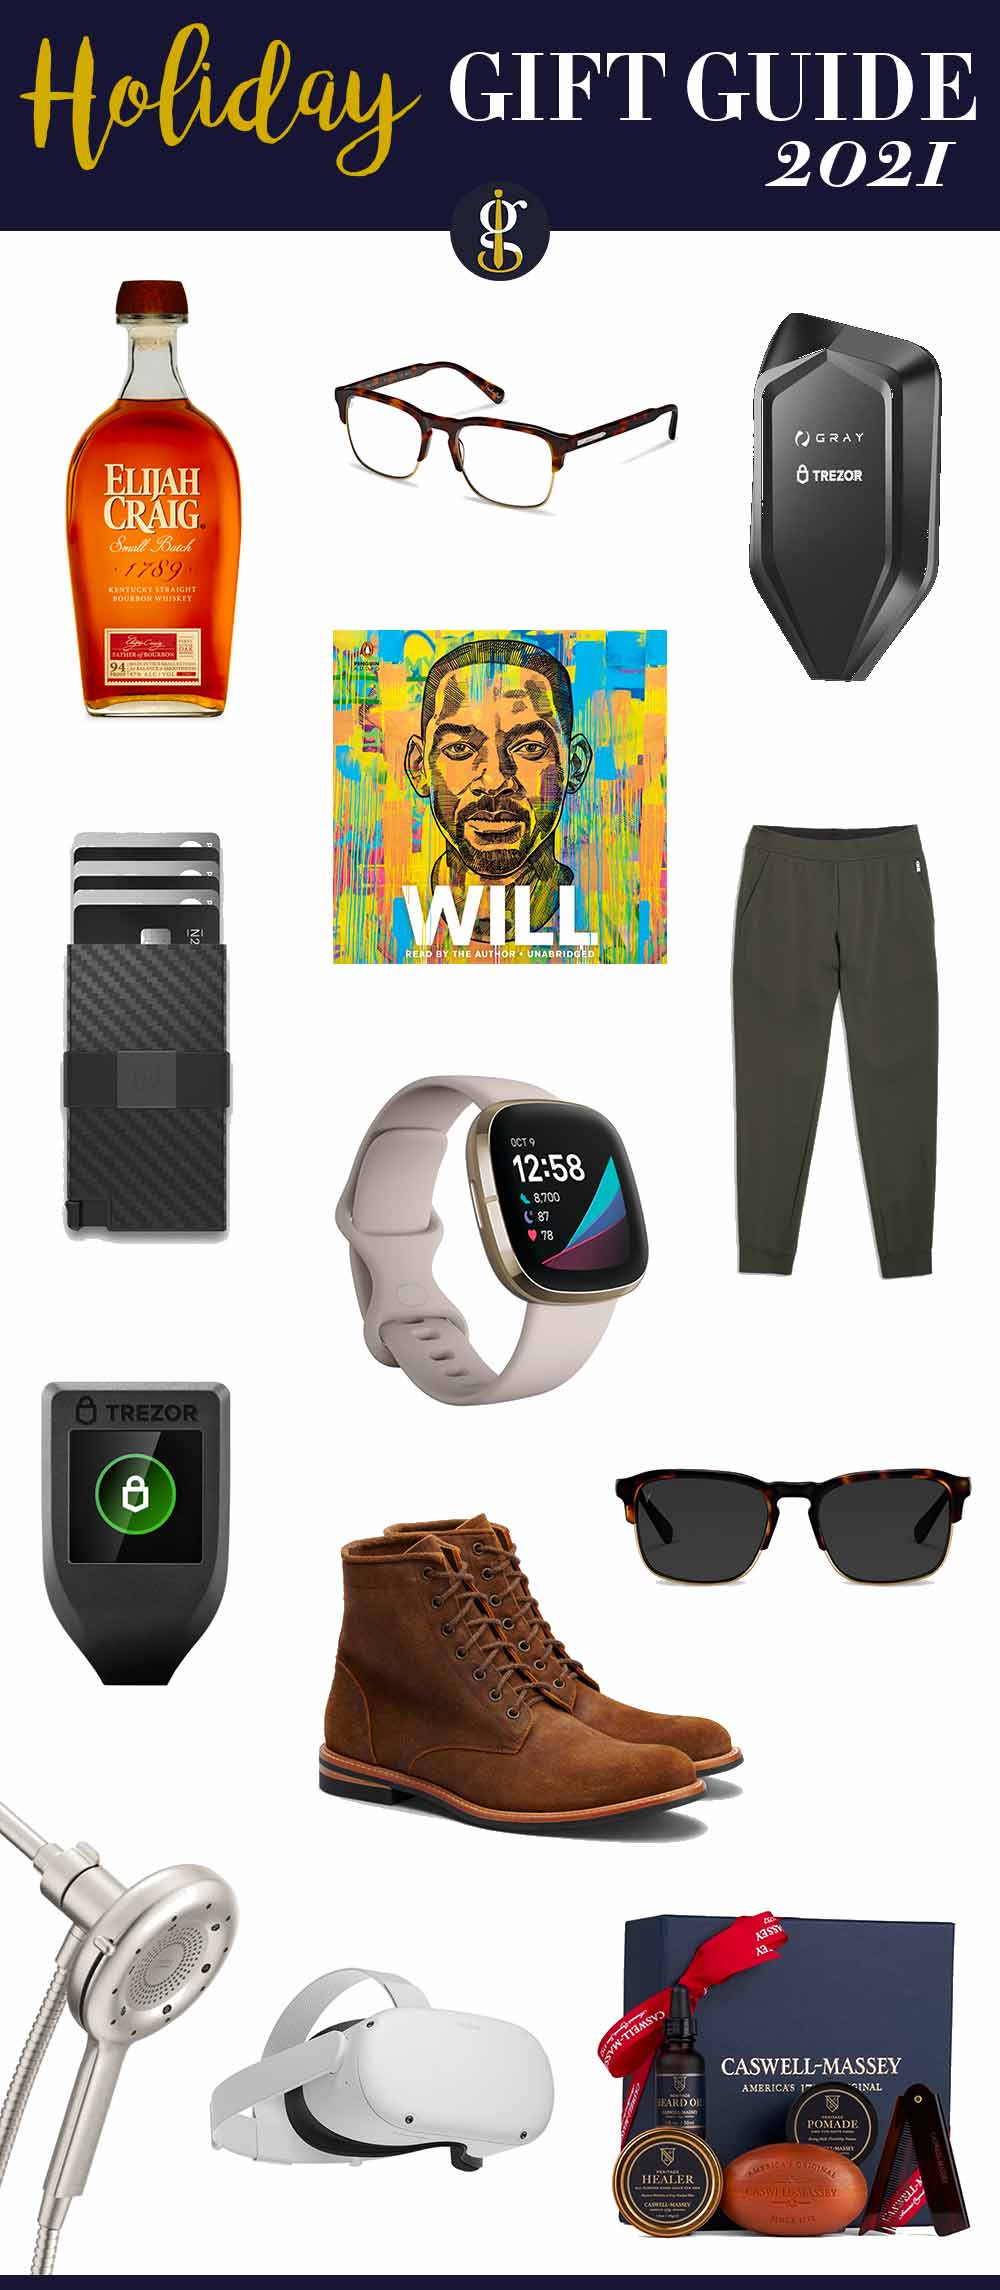 Holiday Gift Guide 2021 (Gifts to Give & to Get) | GENTLEMAN WITHIN